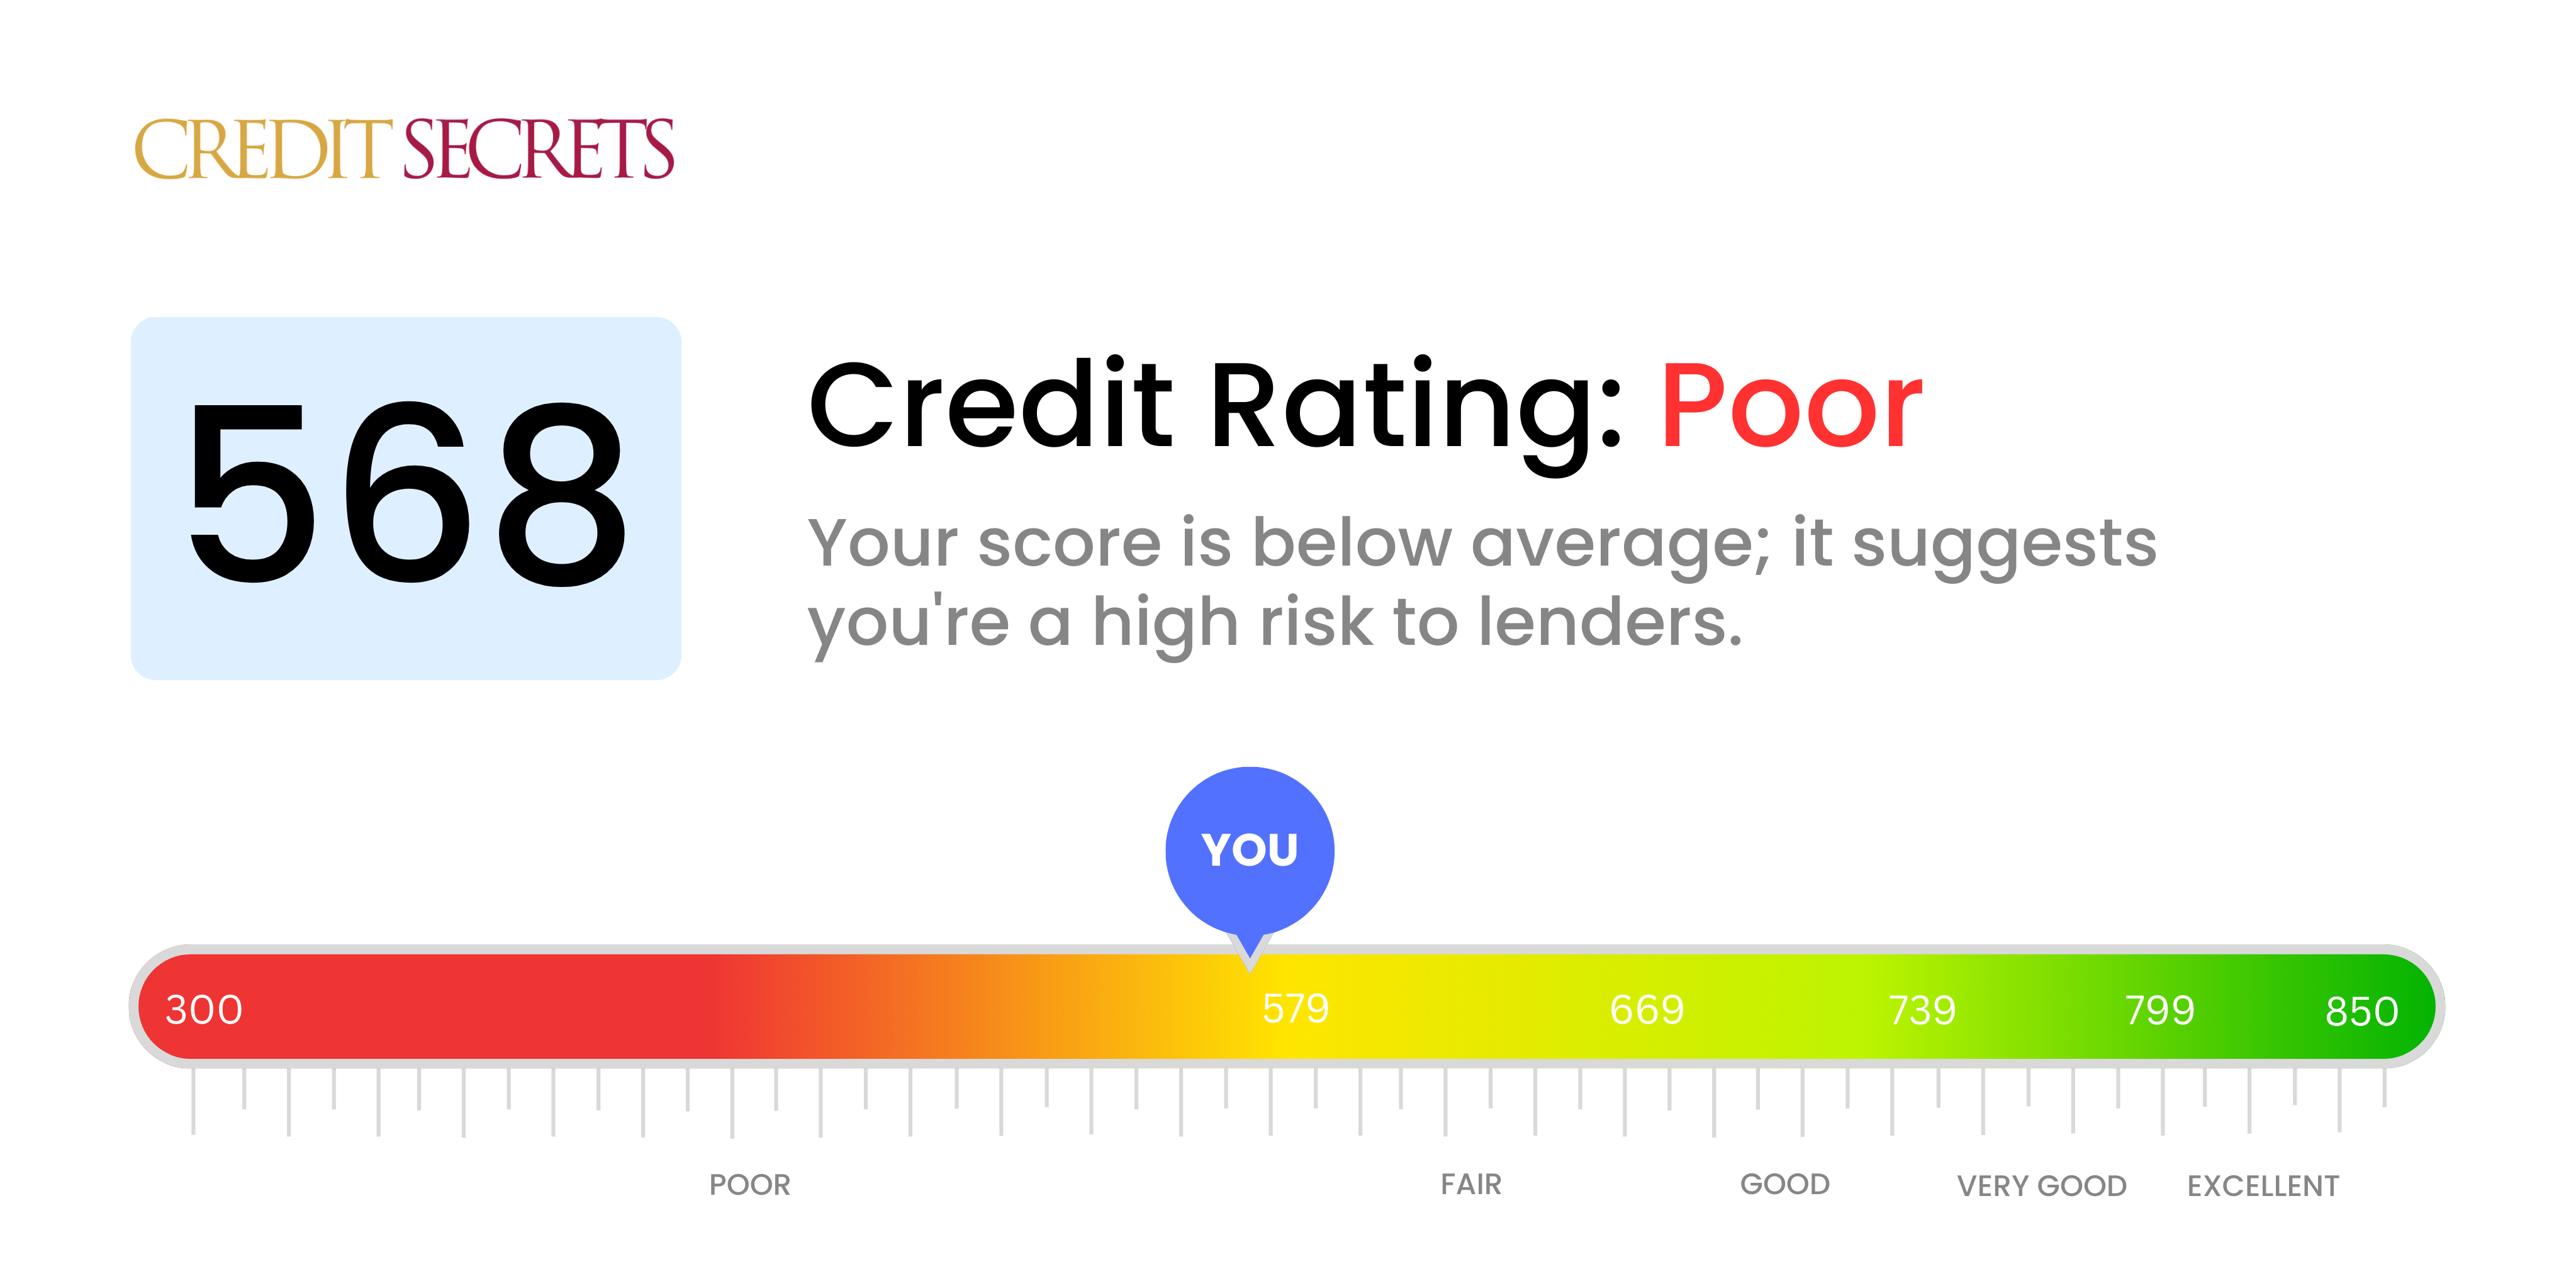 Is 568 a good credit score?